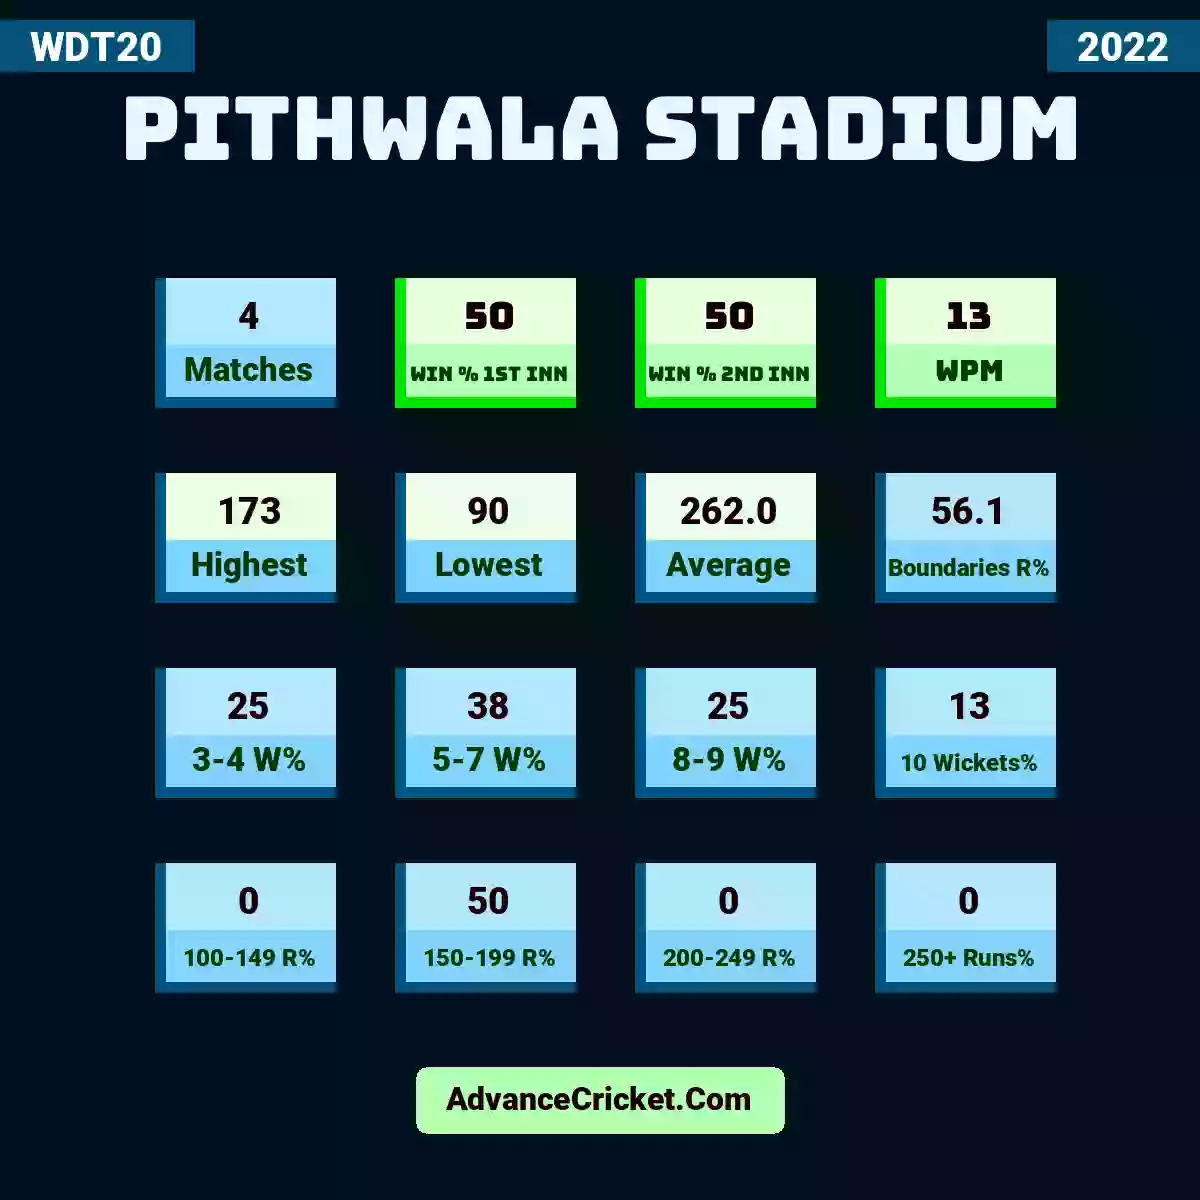 Image showing Pithwala Stadium with Matches: 4, Win % 1st Inn: 50, Win % 2nd Inn: 50, WPM: 13, Highest: 173, Lowest: 90, Average: 262.0, Boundaries R%: 56.1, 3-4 W%: 25, 5-7 W%: 38, 8-9 W%: 25, 10 Wickets%: 13, 100-149 R%: 0, 150-199 R%: 50, 200-249 R%: 0, 250+ Runs%: 0.